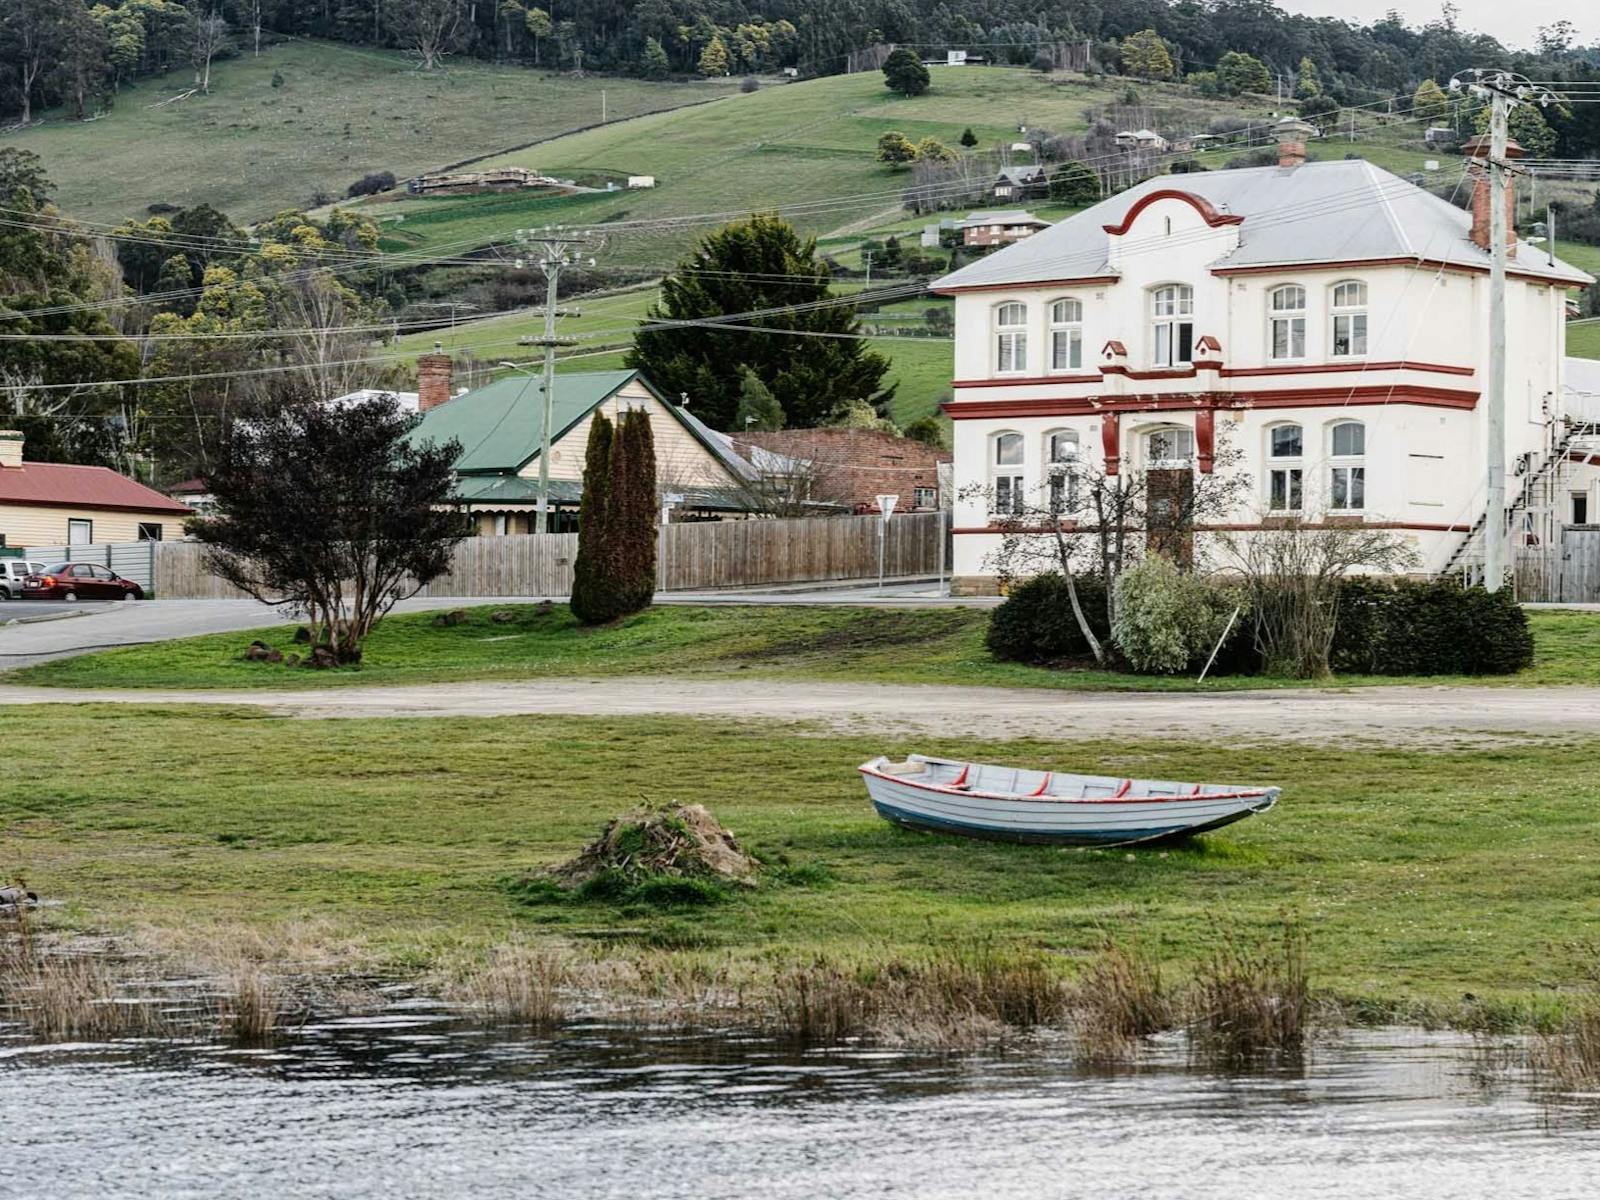 Two story Edwardian building on the banks of the Huon river , a row boat sits on the riverbank